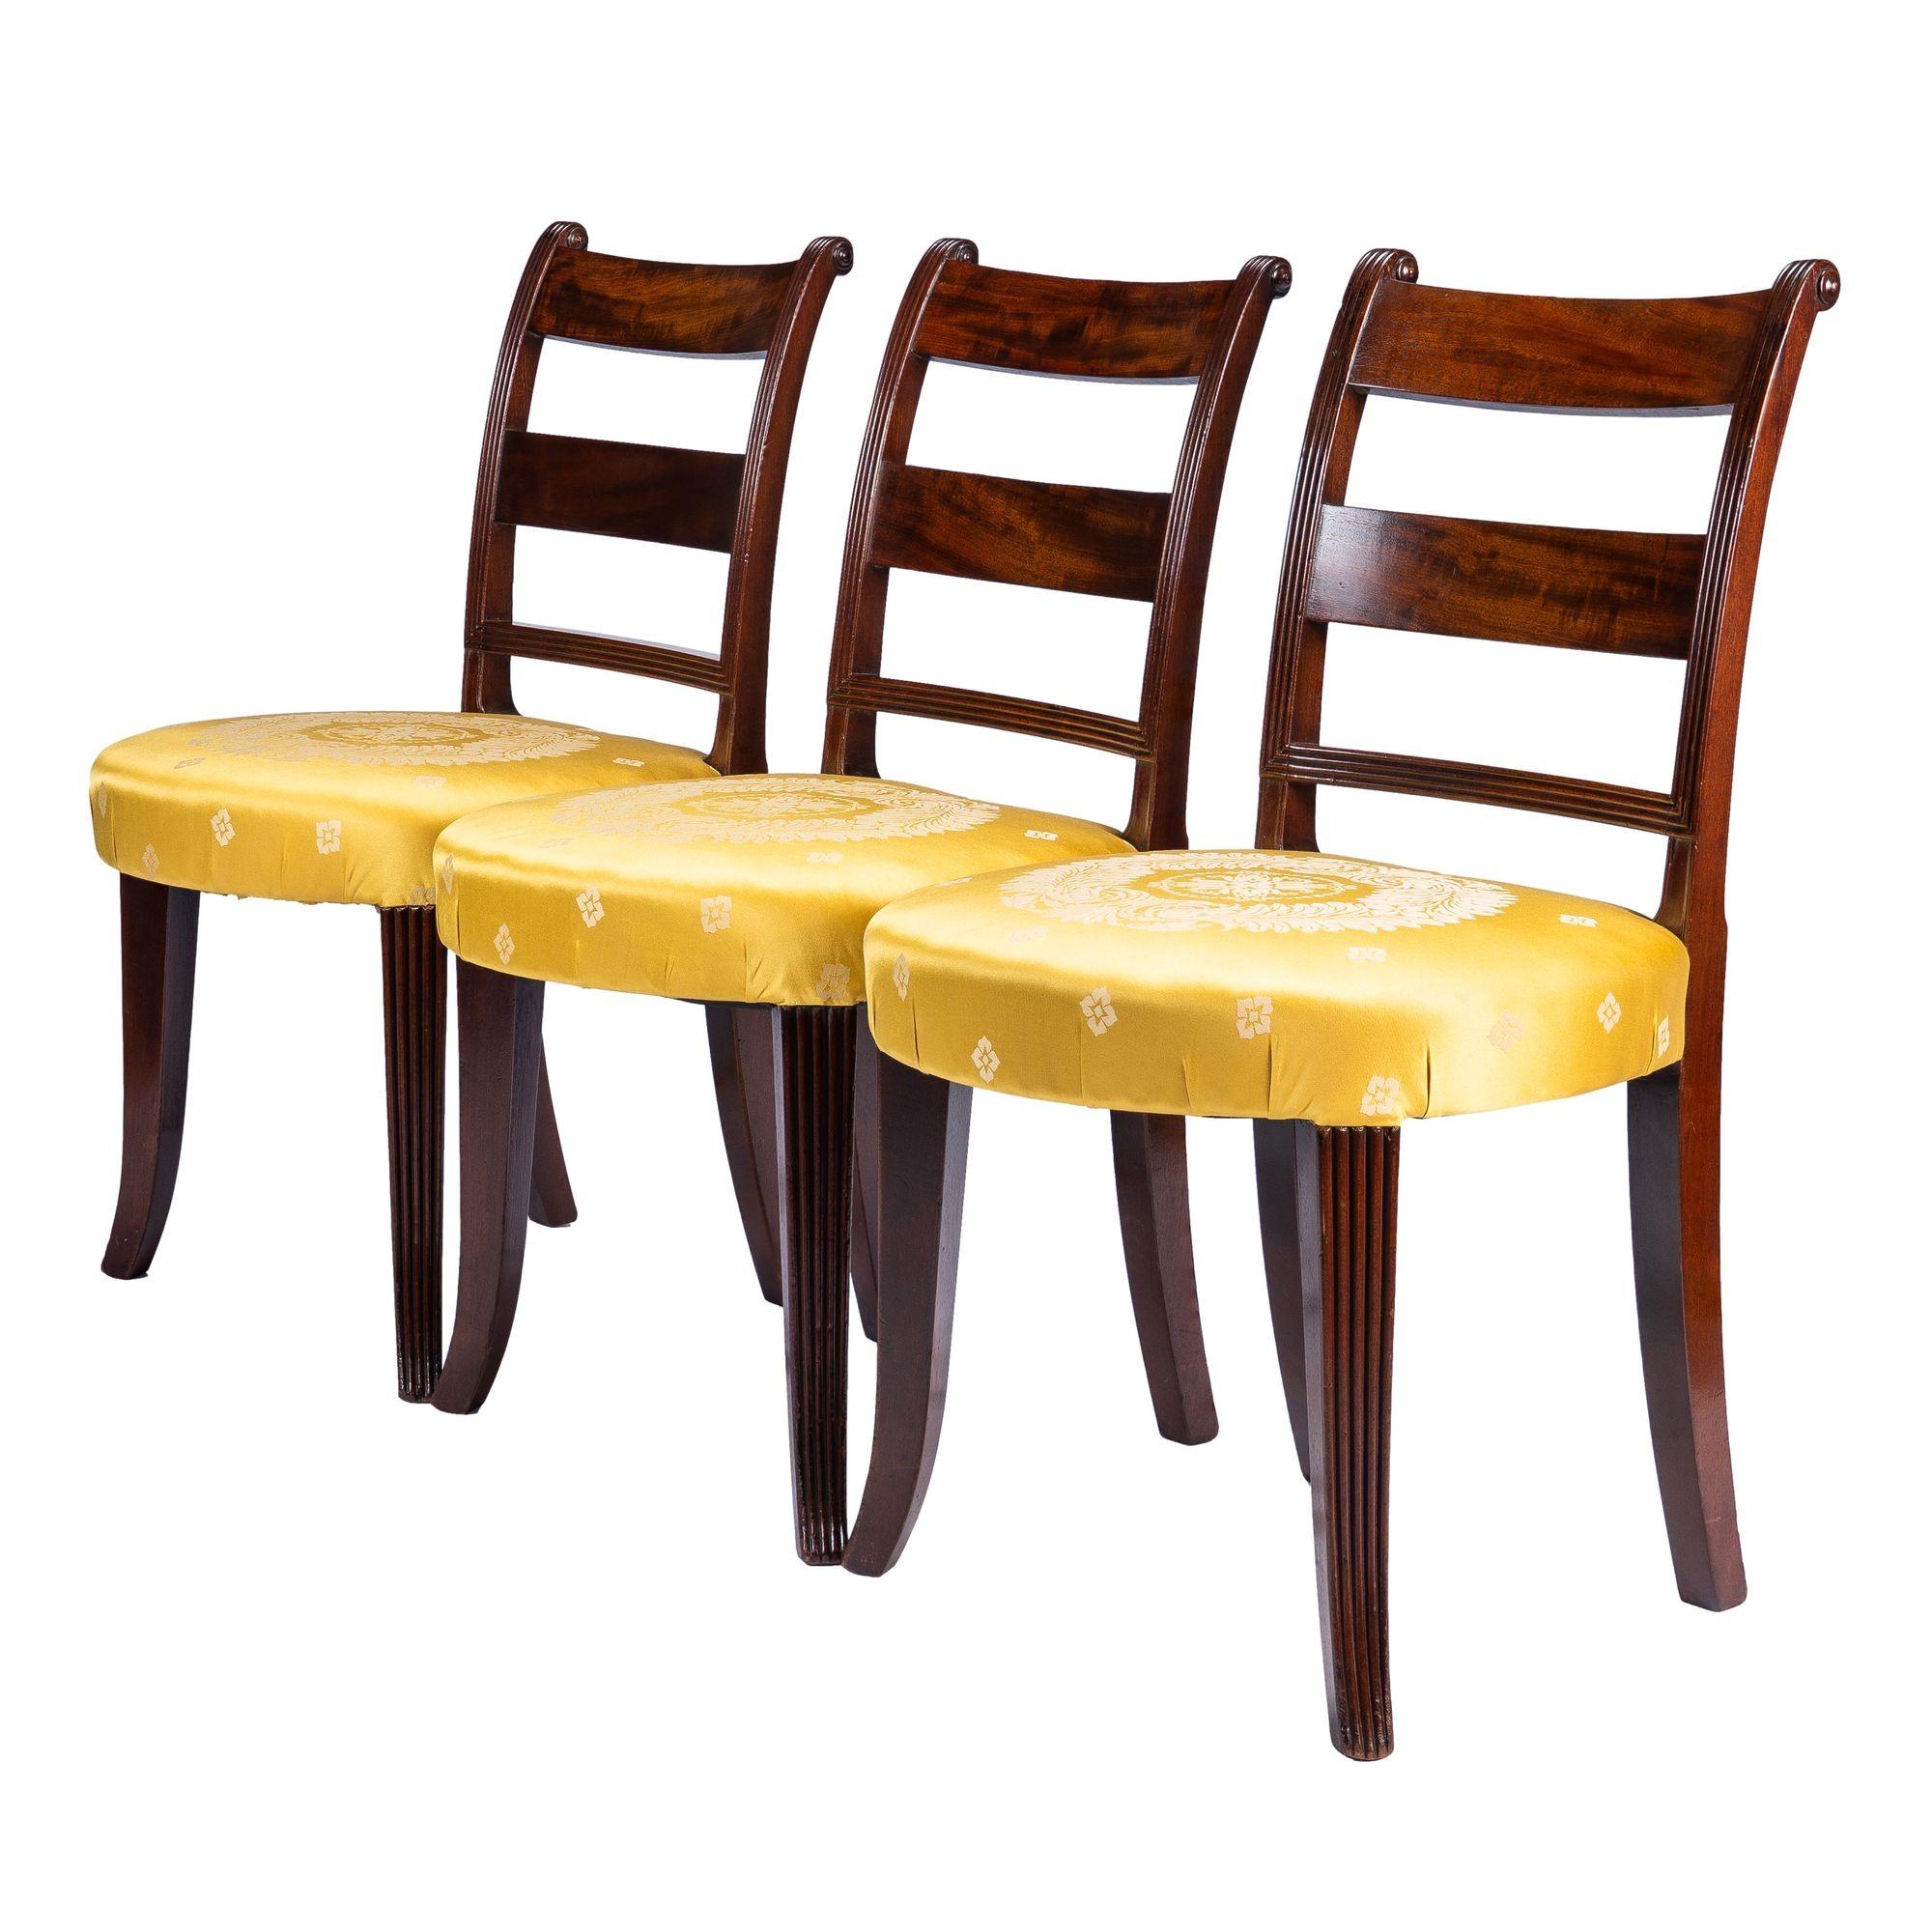 Set of three American mahogany upholstered seat side chairs on reeded sabre legs with flared feet. The London cabinetmakers book of this period describes a scroll back chair with a bell-shaped seat and sweeping Grecian front legs with a hollow below